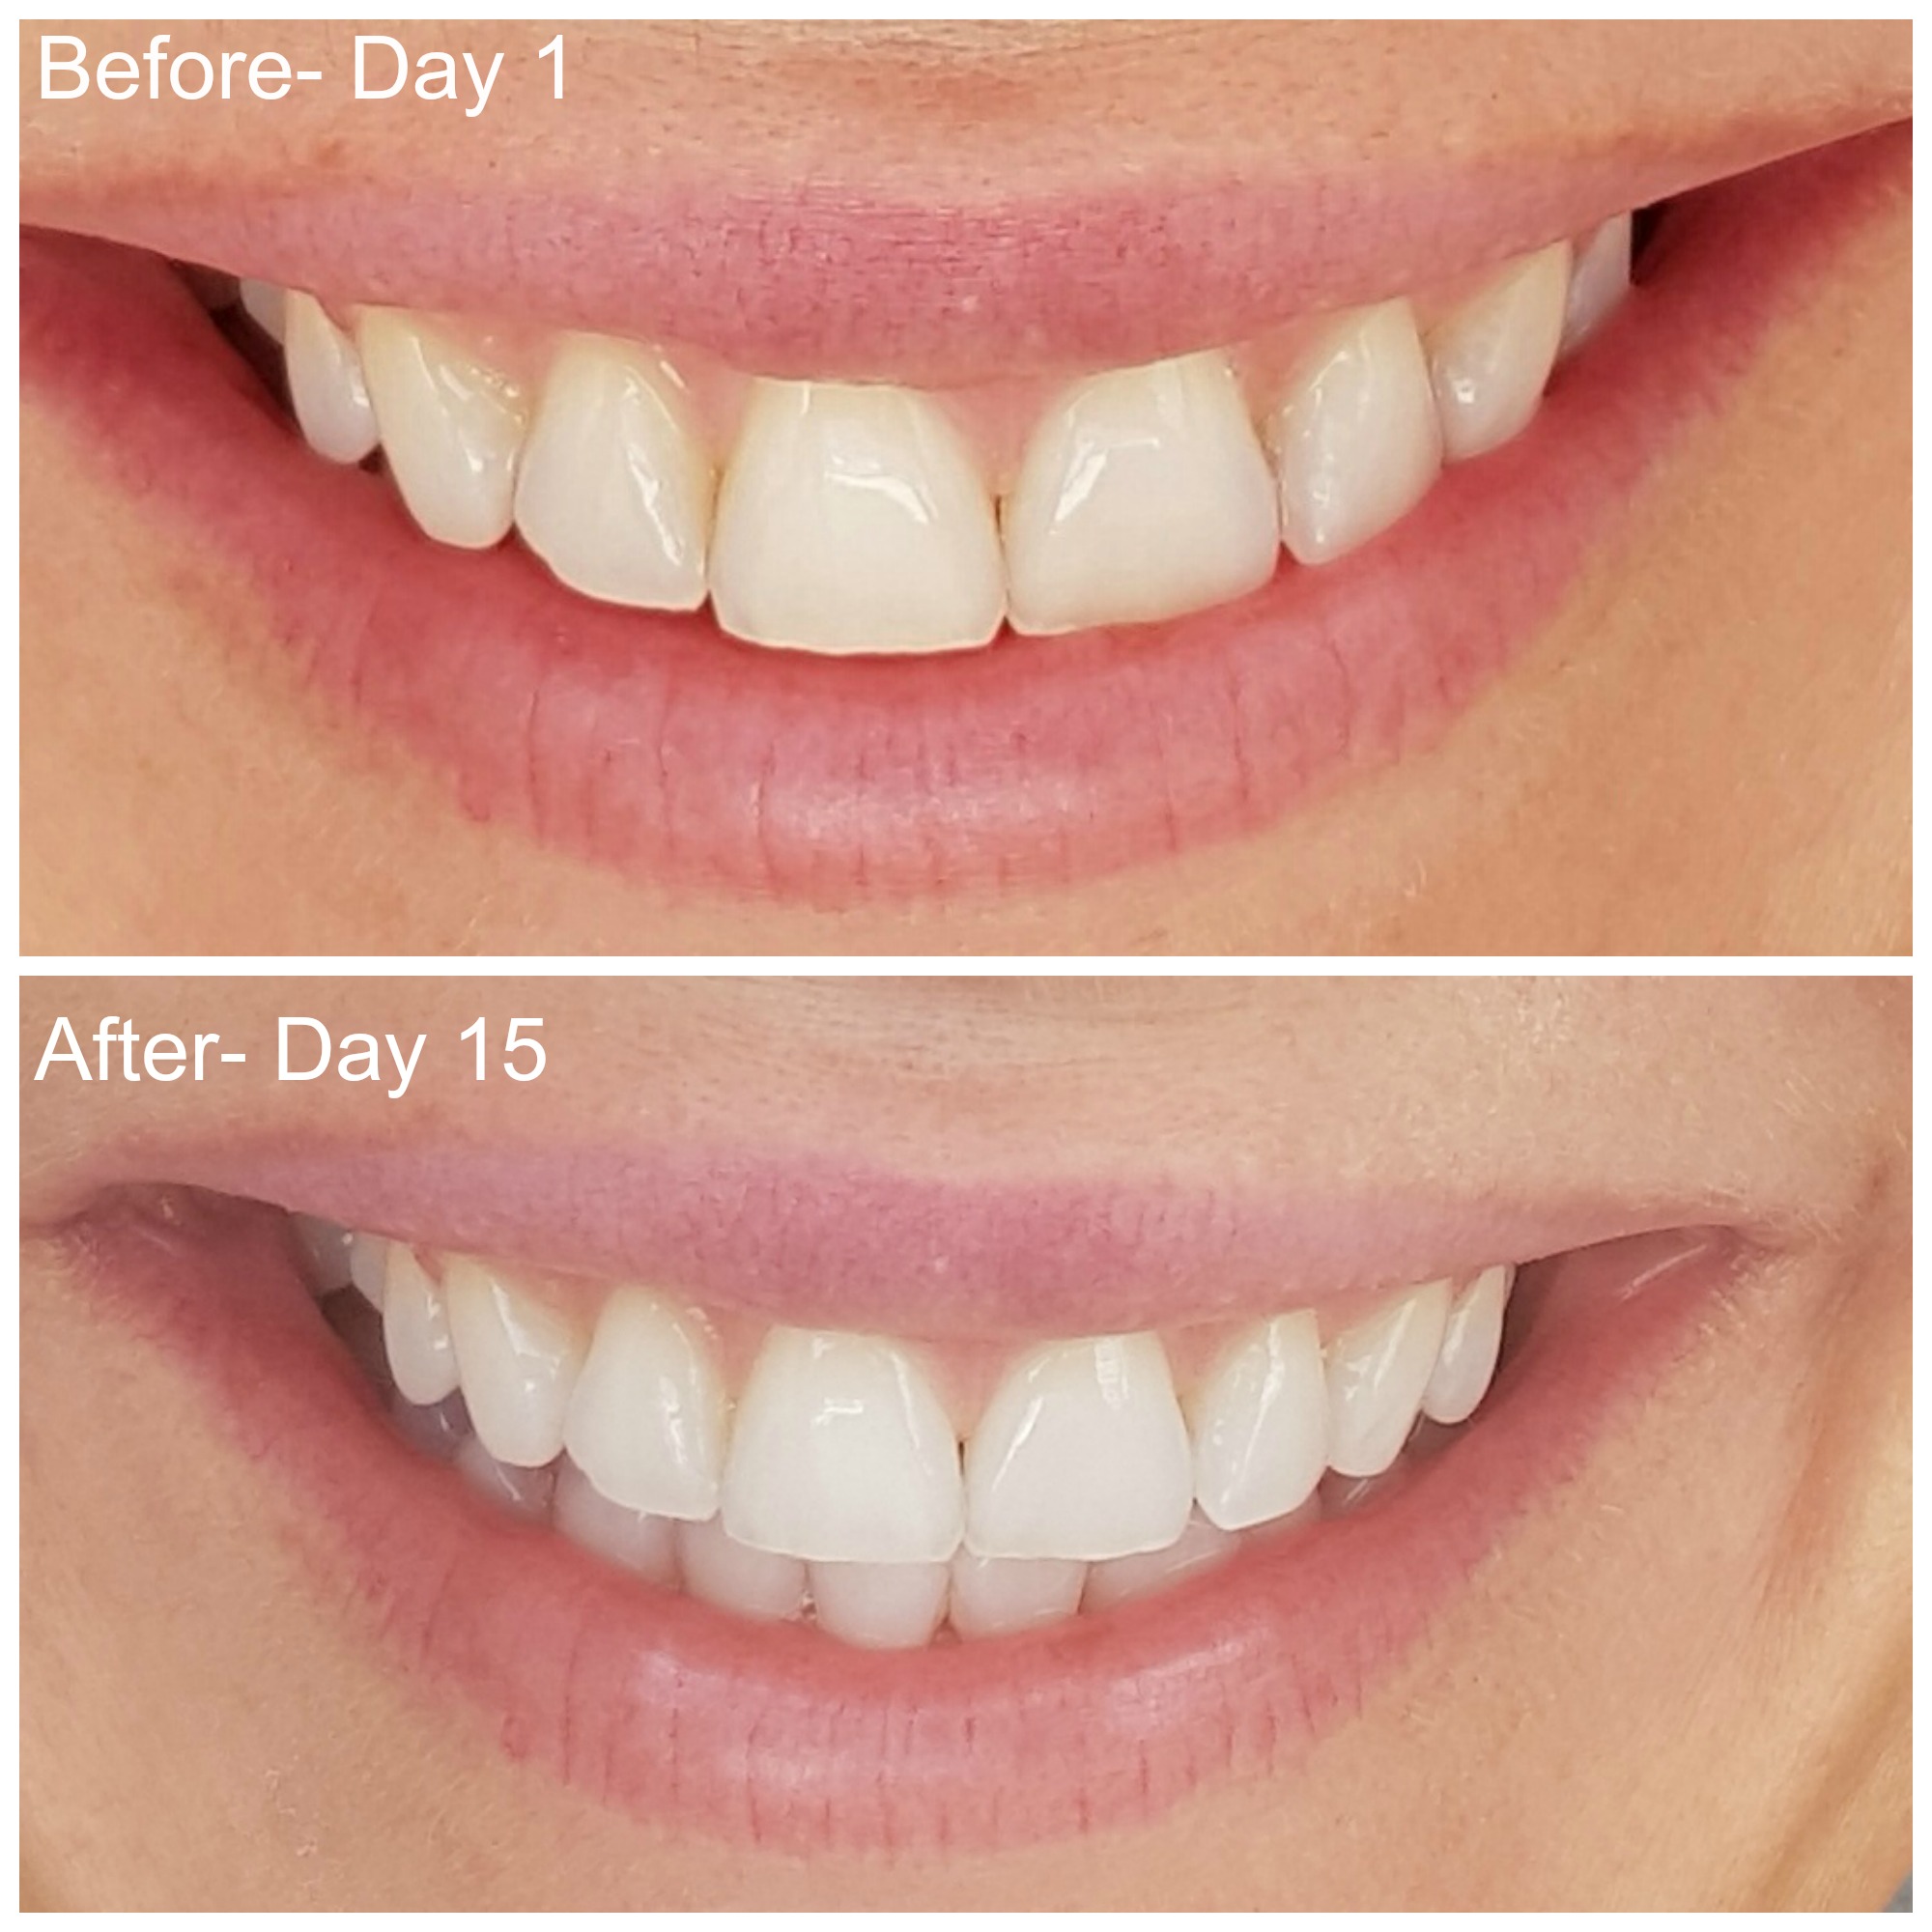 Smile Brilliant before and after teeth whitening at home results